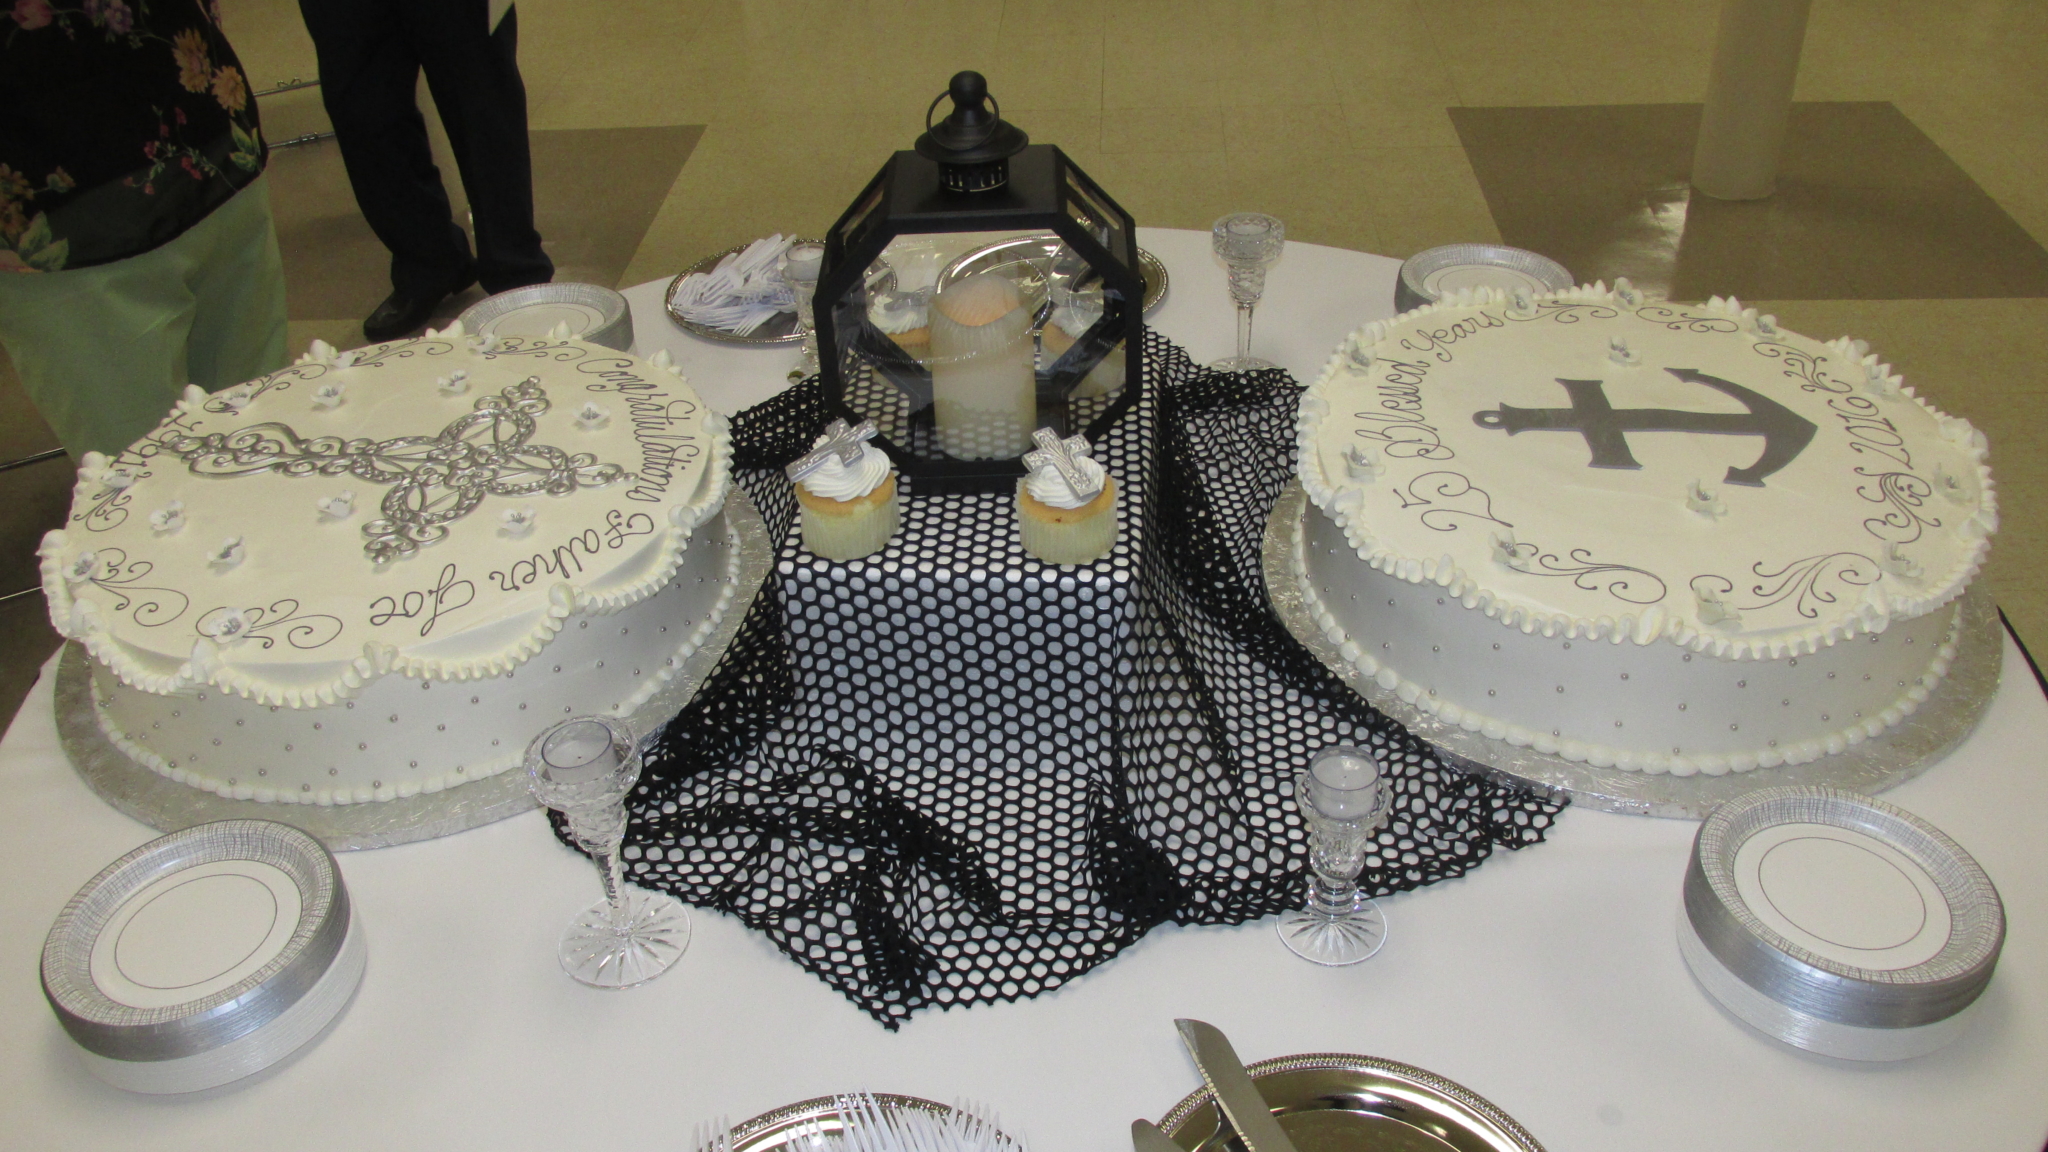 Fr. Joe’s 25th Anniversary cakes – one each for St. Vincent de Paul Parish and Our Lady of Good Voyage Chapel.